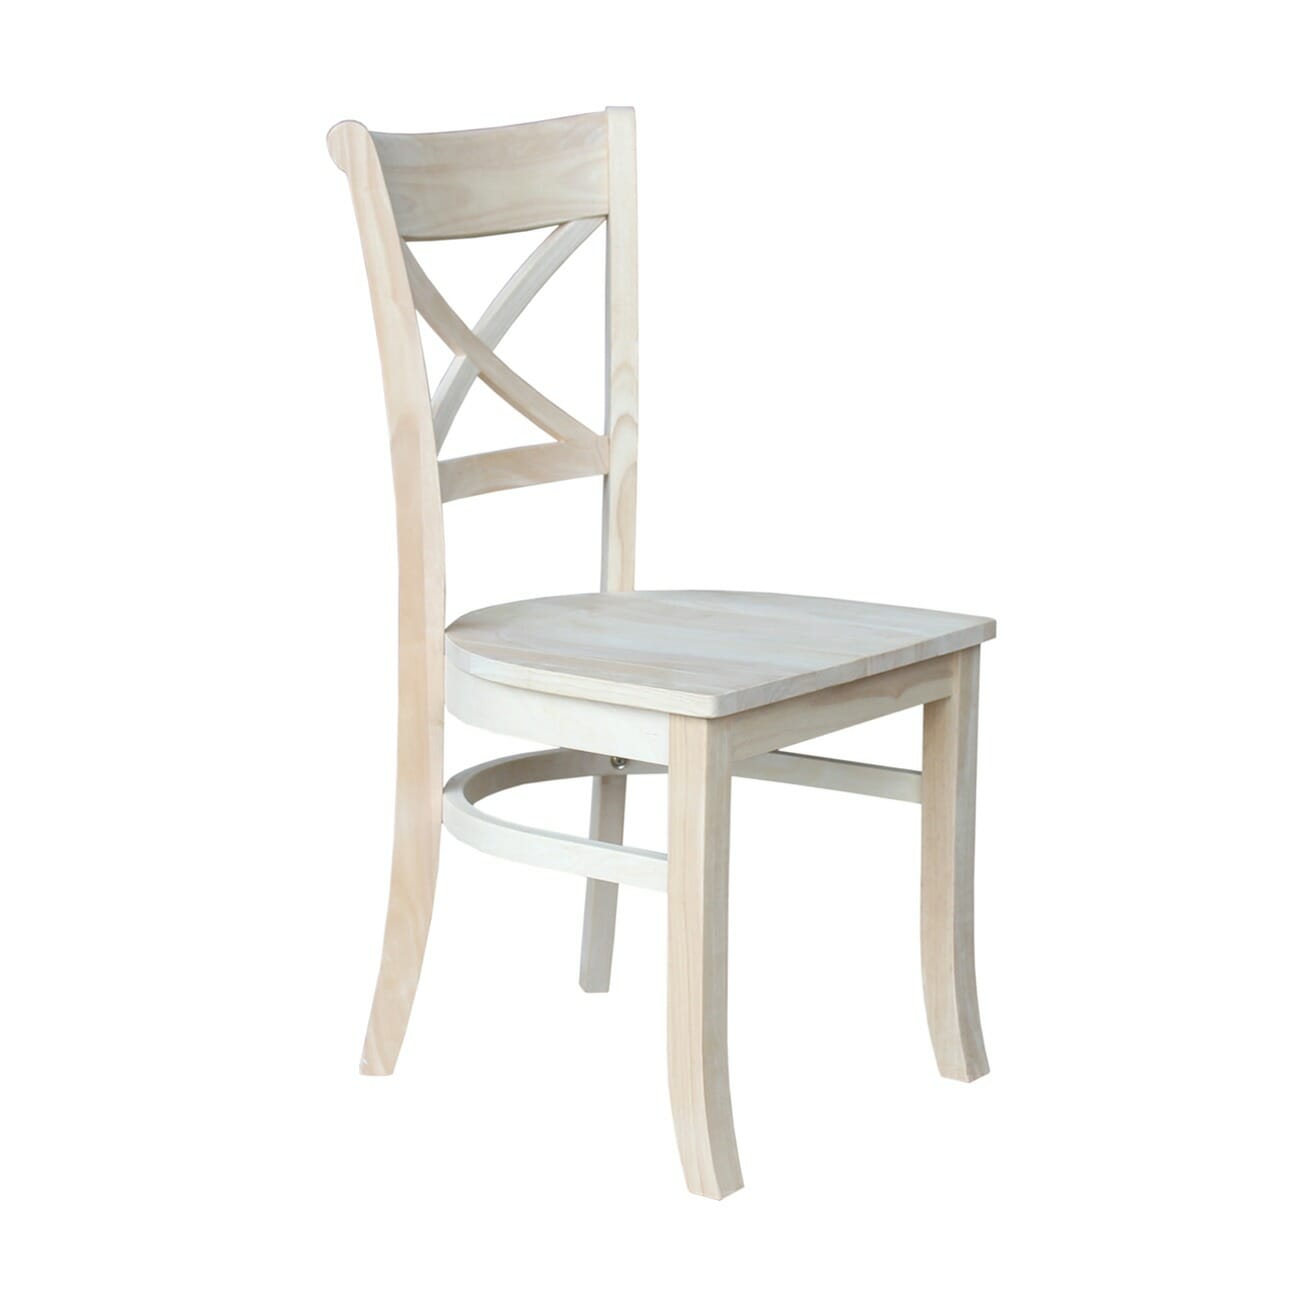 C-31 Charlotte Chair 2-pack w/FREE SHIPPING | Unfinished Furniture of ...